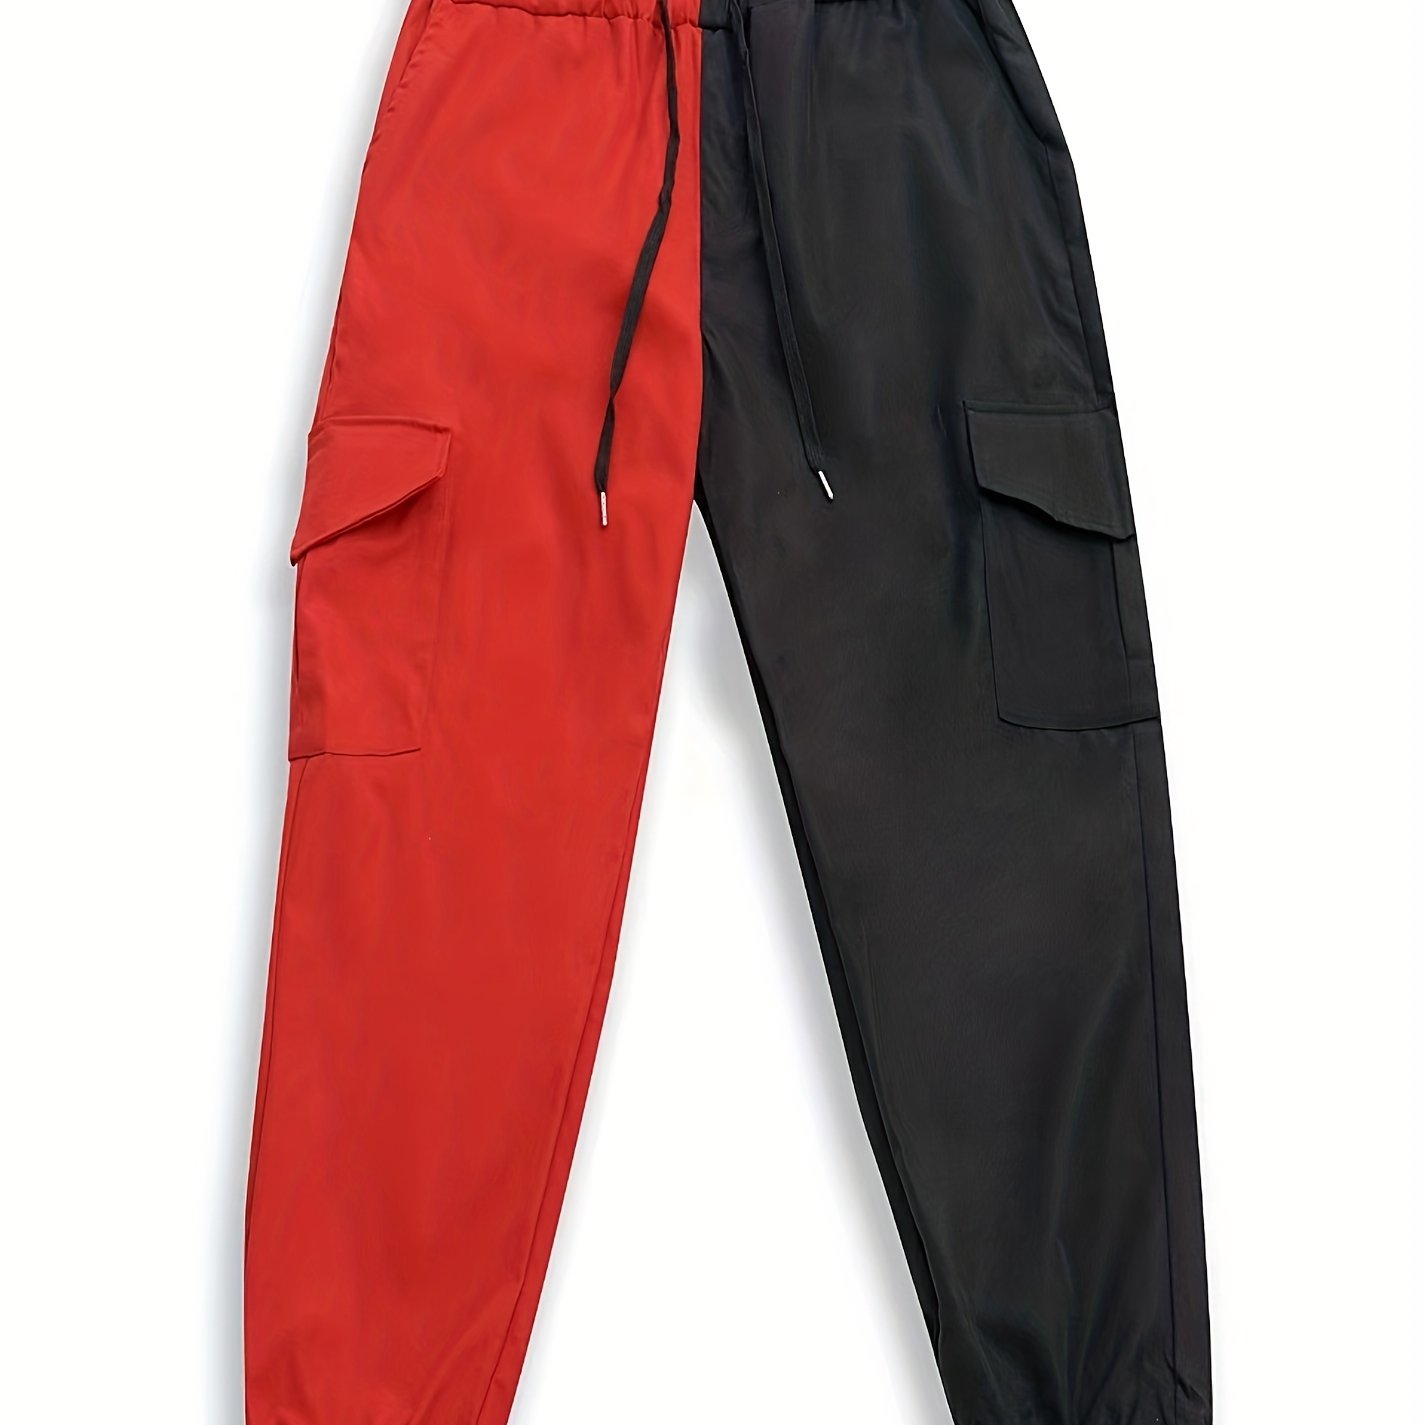 Style 500M Black Microfiber Baggy Pants With Red Crazee Wear